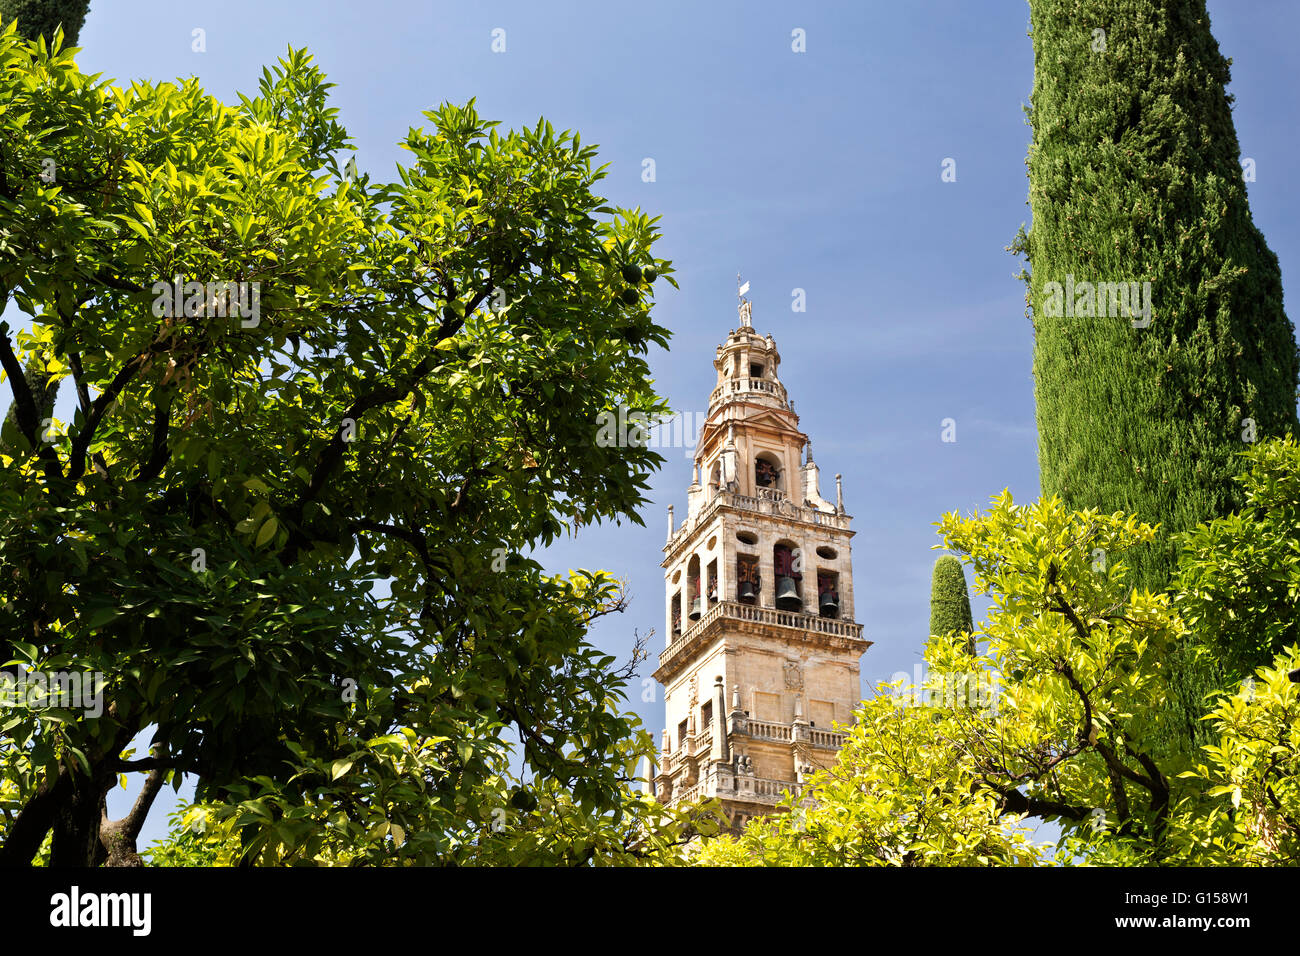 The Bell Tower, also called the Tower of Alminar, seen from the Courtyard of the Orange Trees of the Mosque-Cathedral of Cordoba Stock Photo